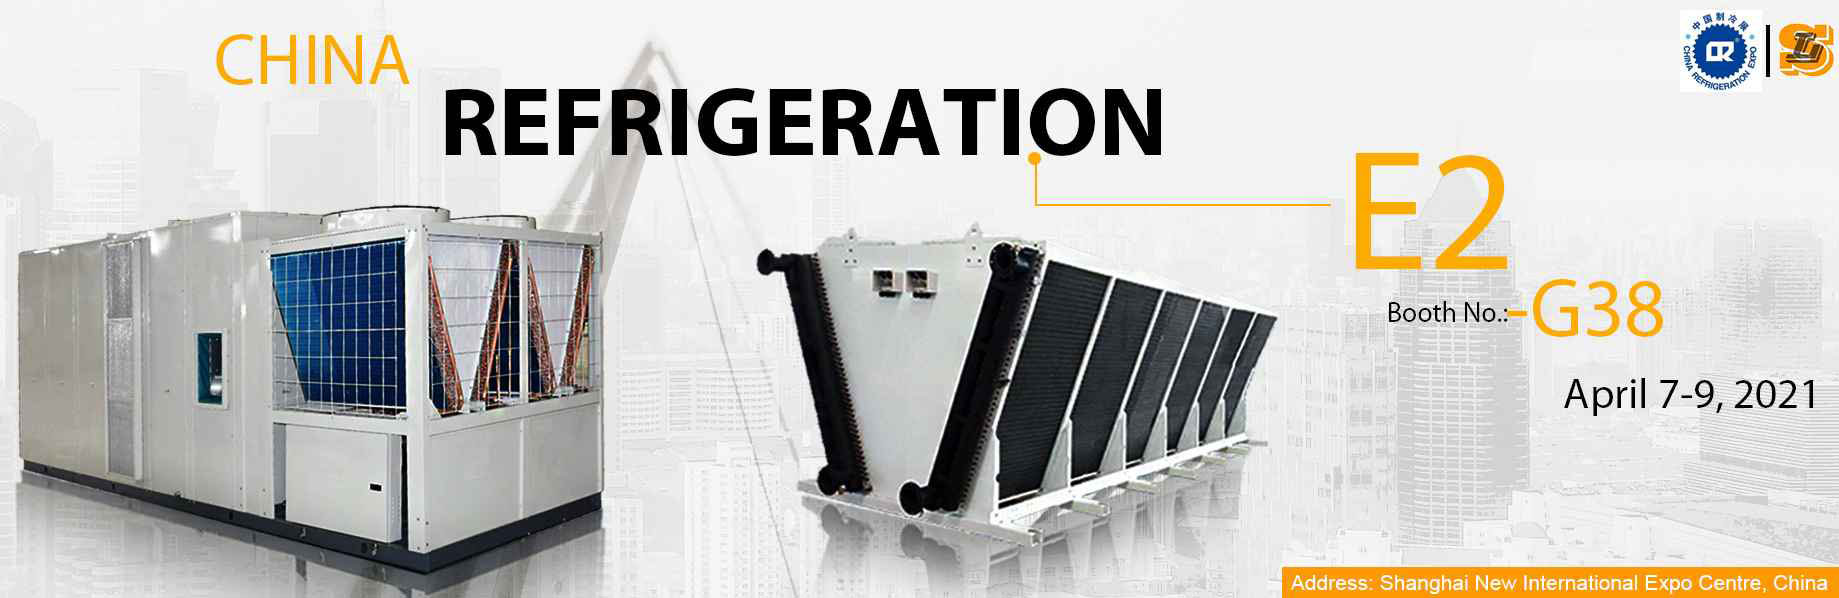 2021 China Refrigeration Expo Waiting For You